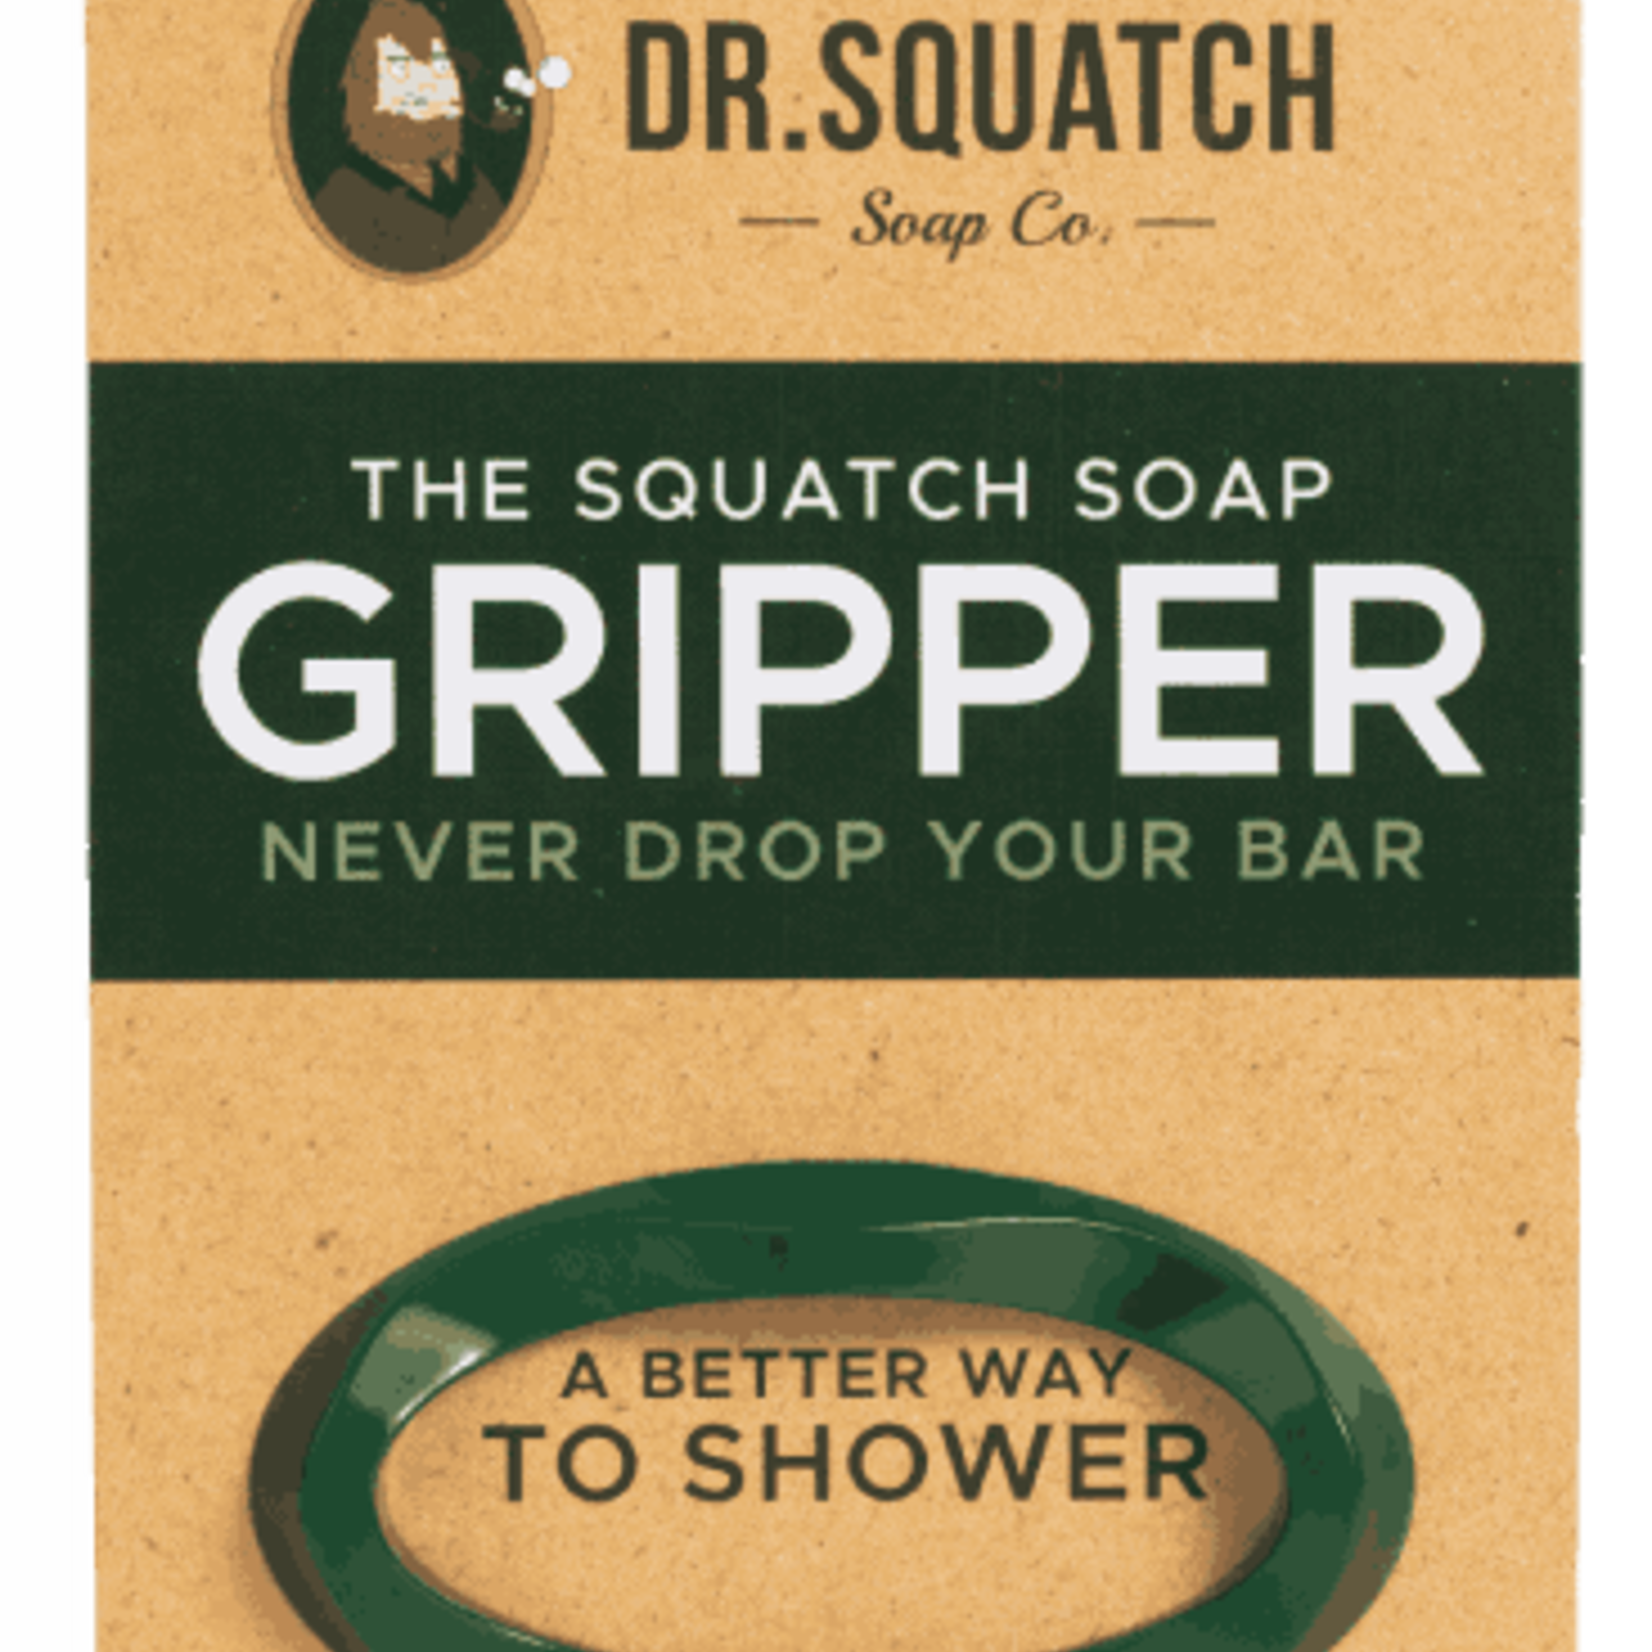 Dr. Squatch - Pine Tar Soap - Be Charmed Gifts